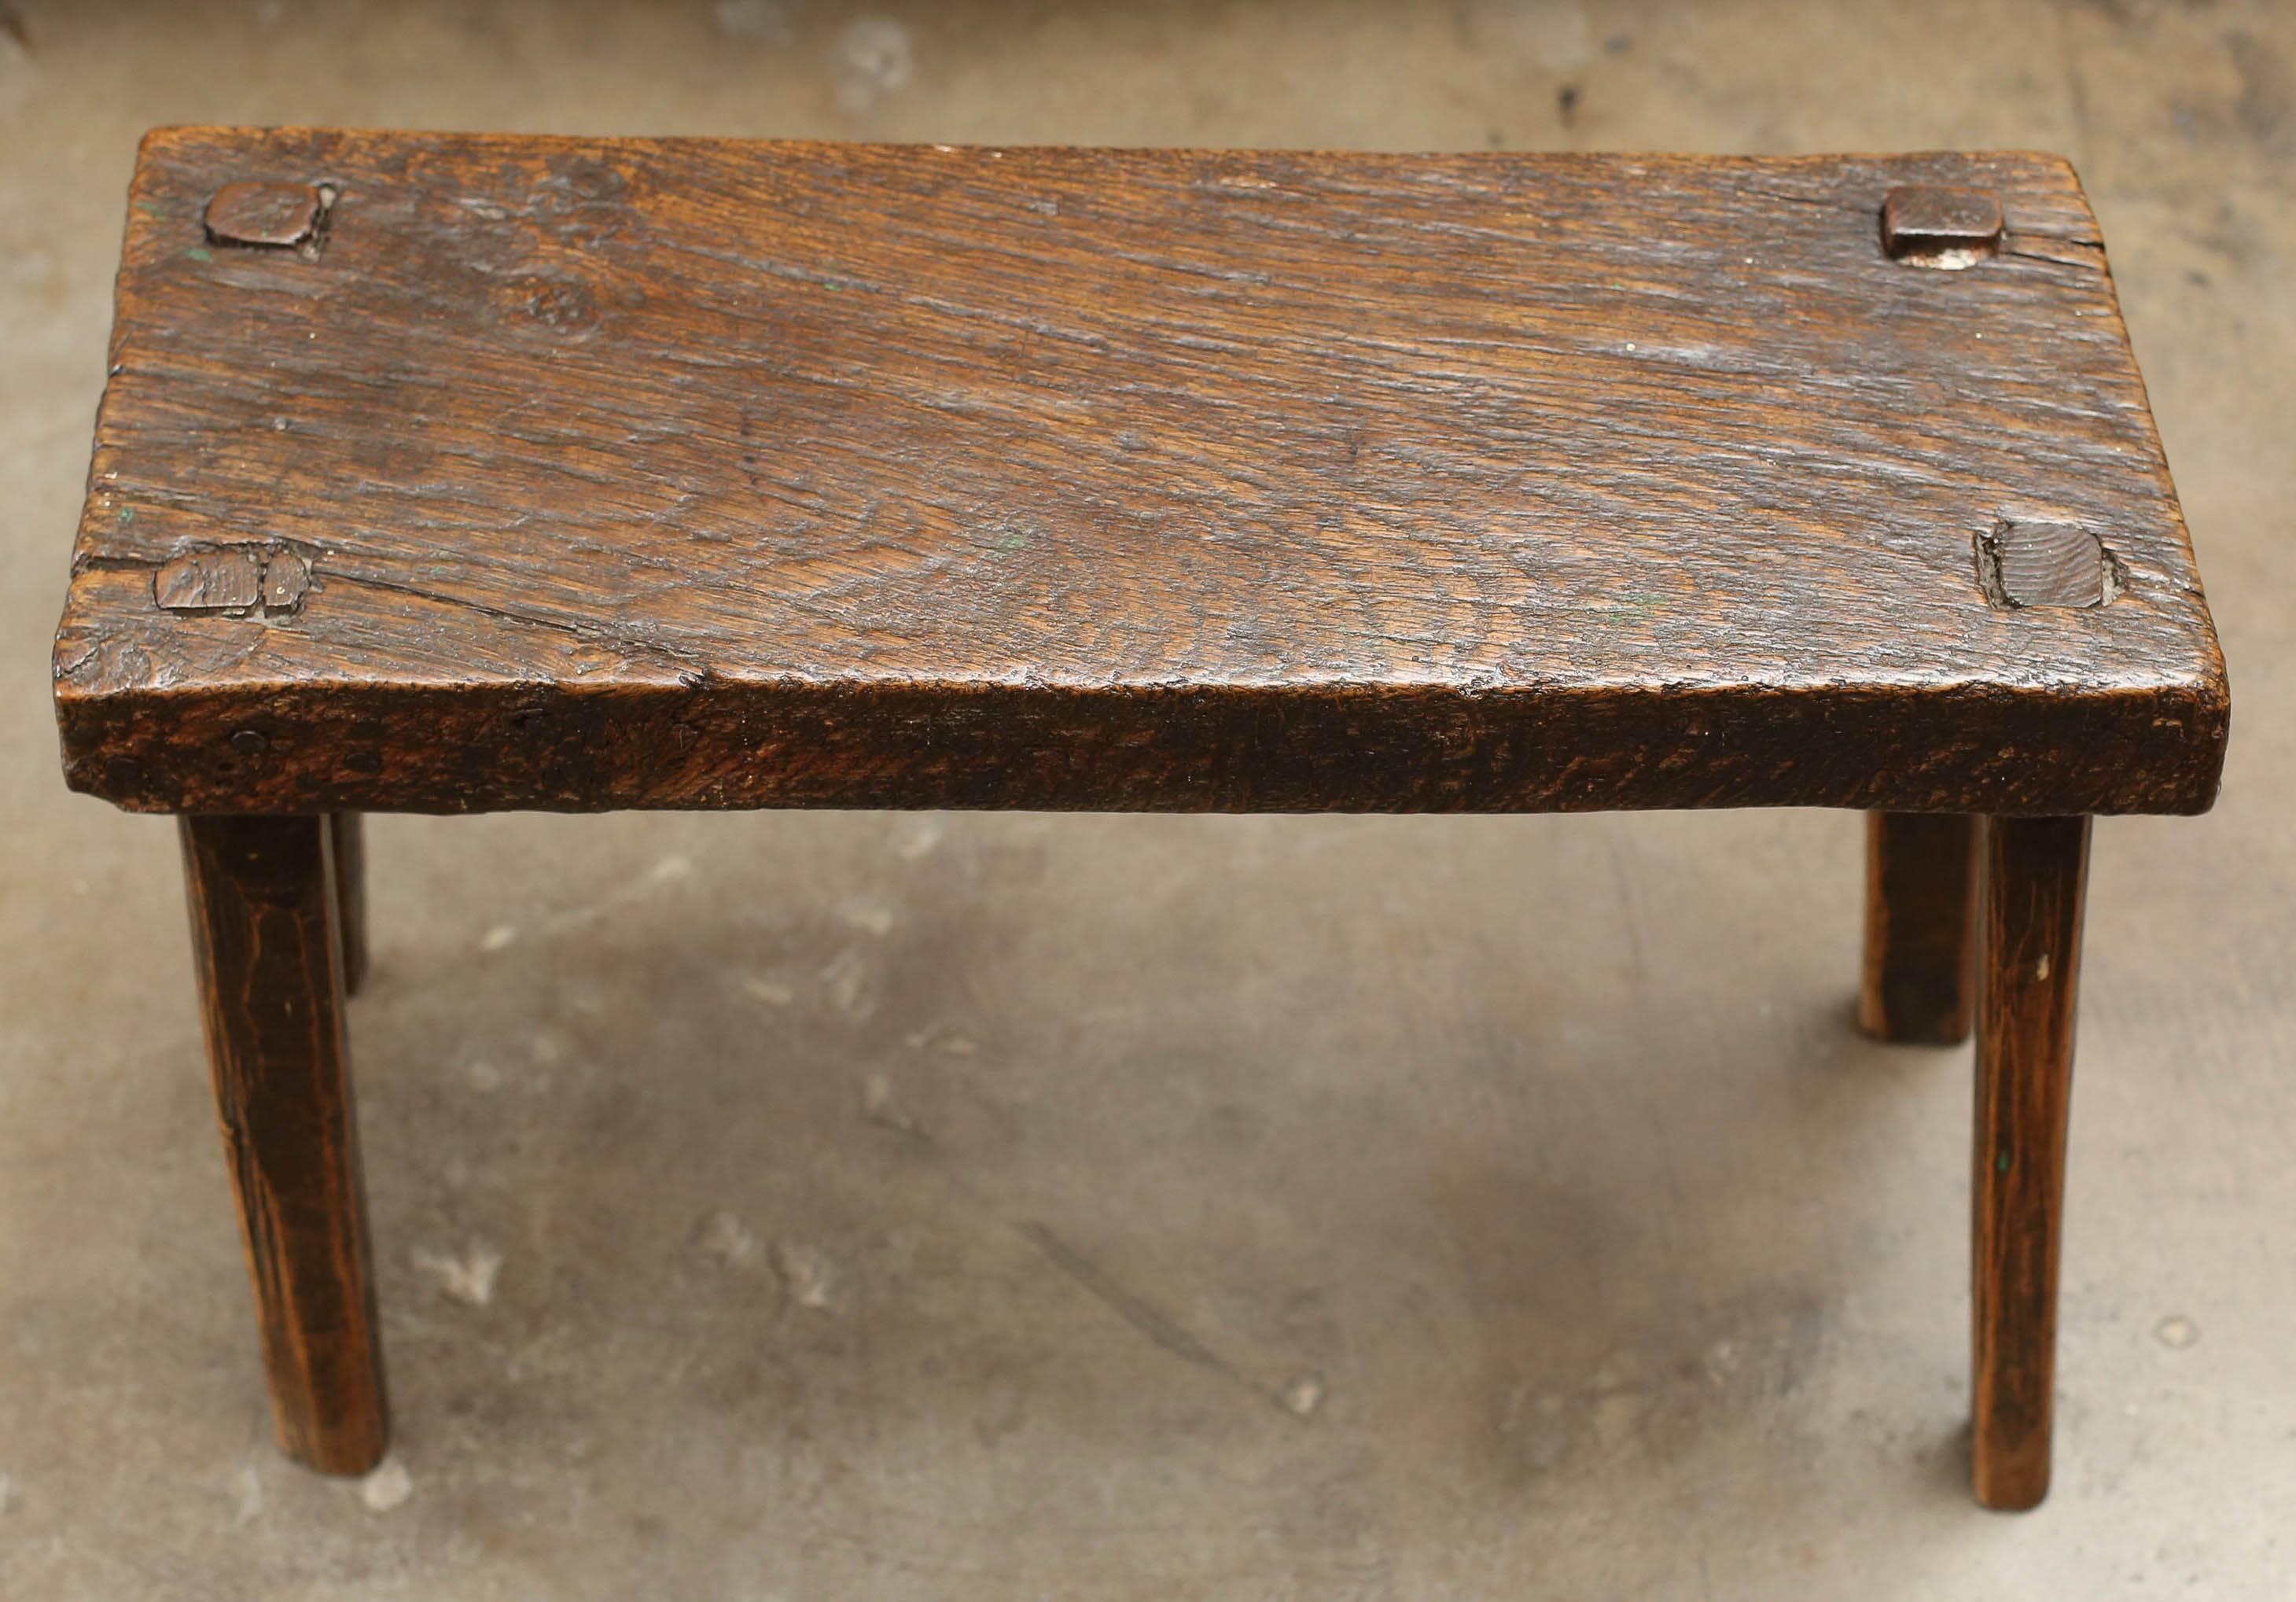 18th century rustic stool from England with thick top and straight legs. Very sturdy and beautiful patina.